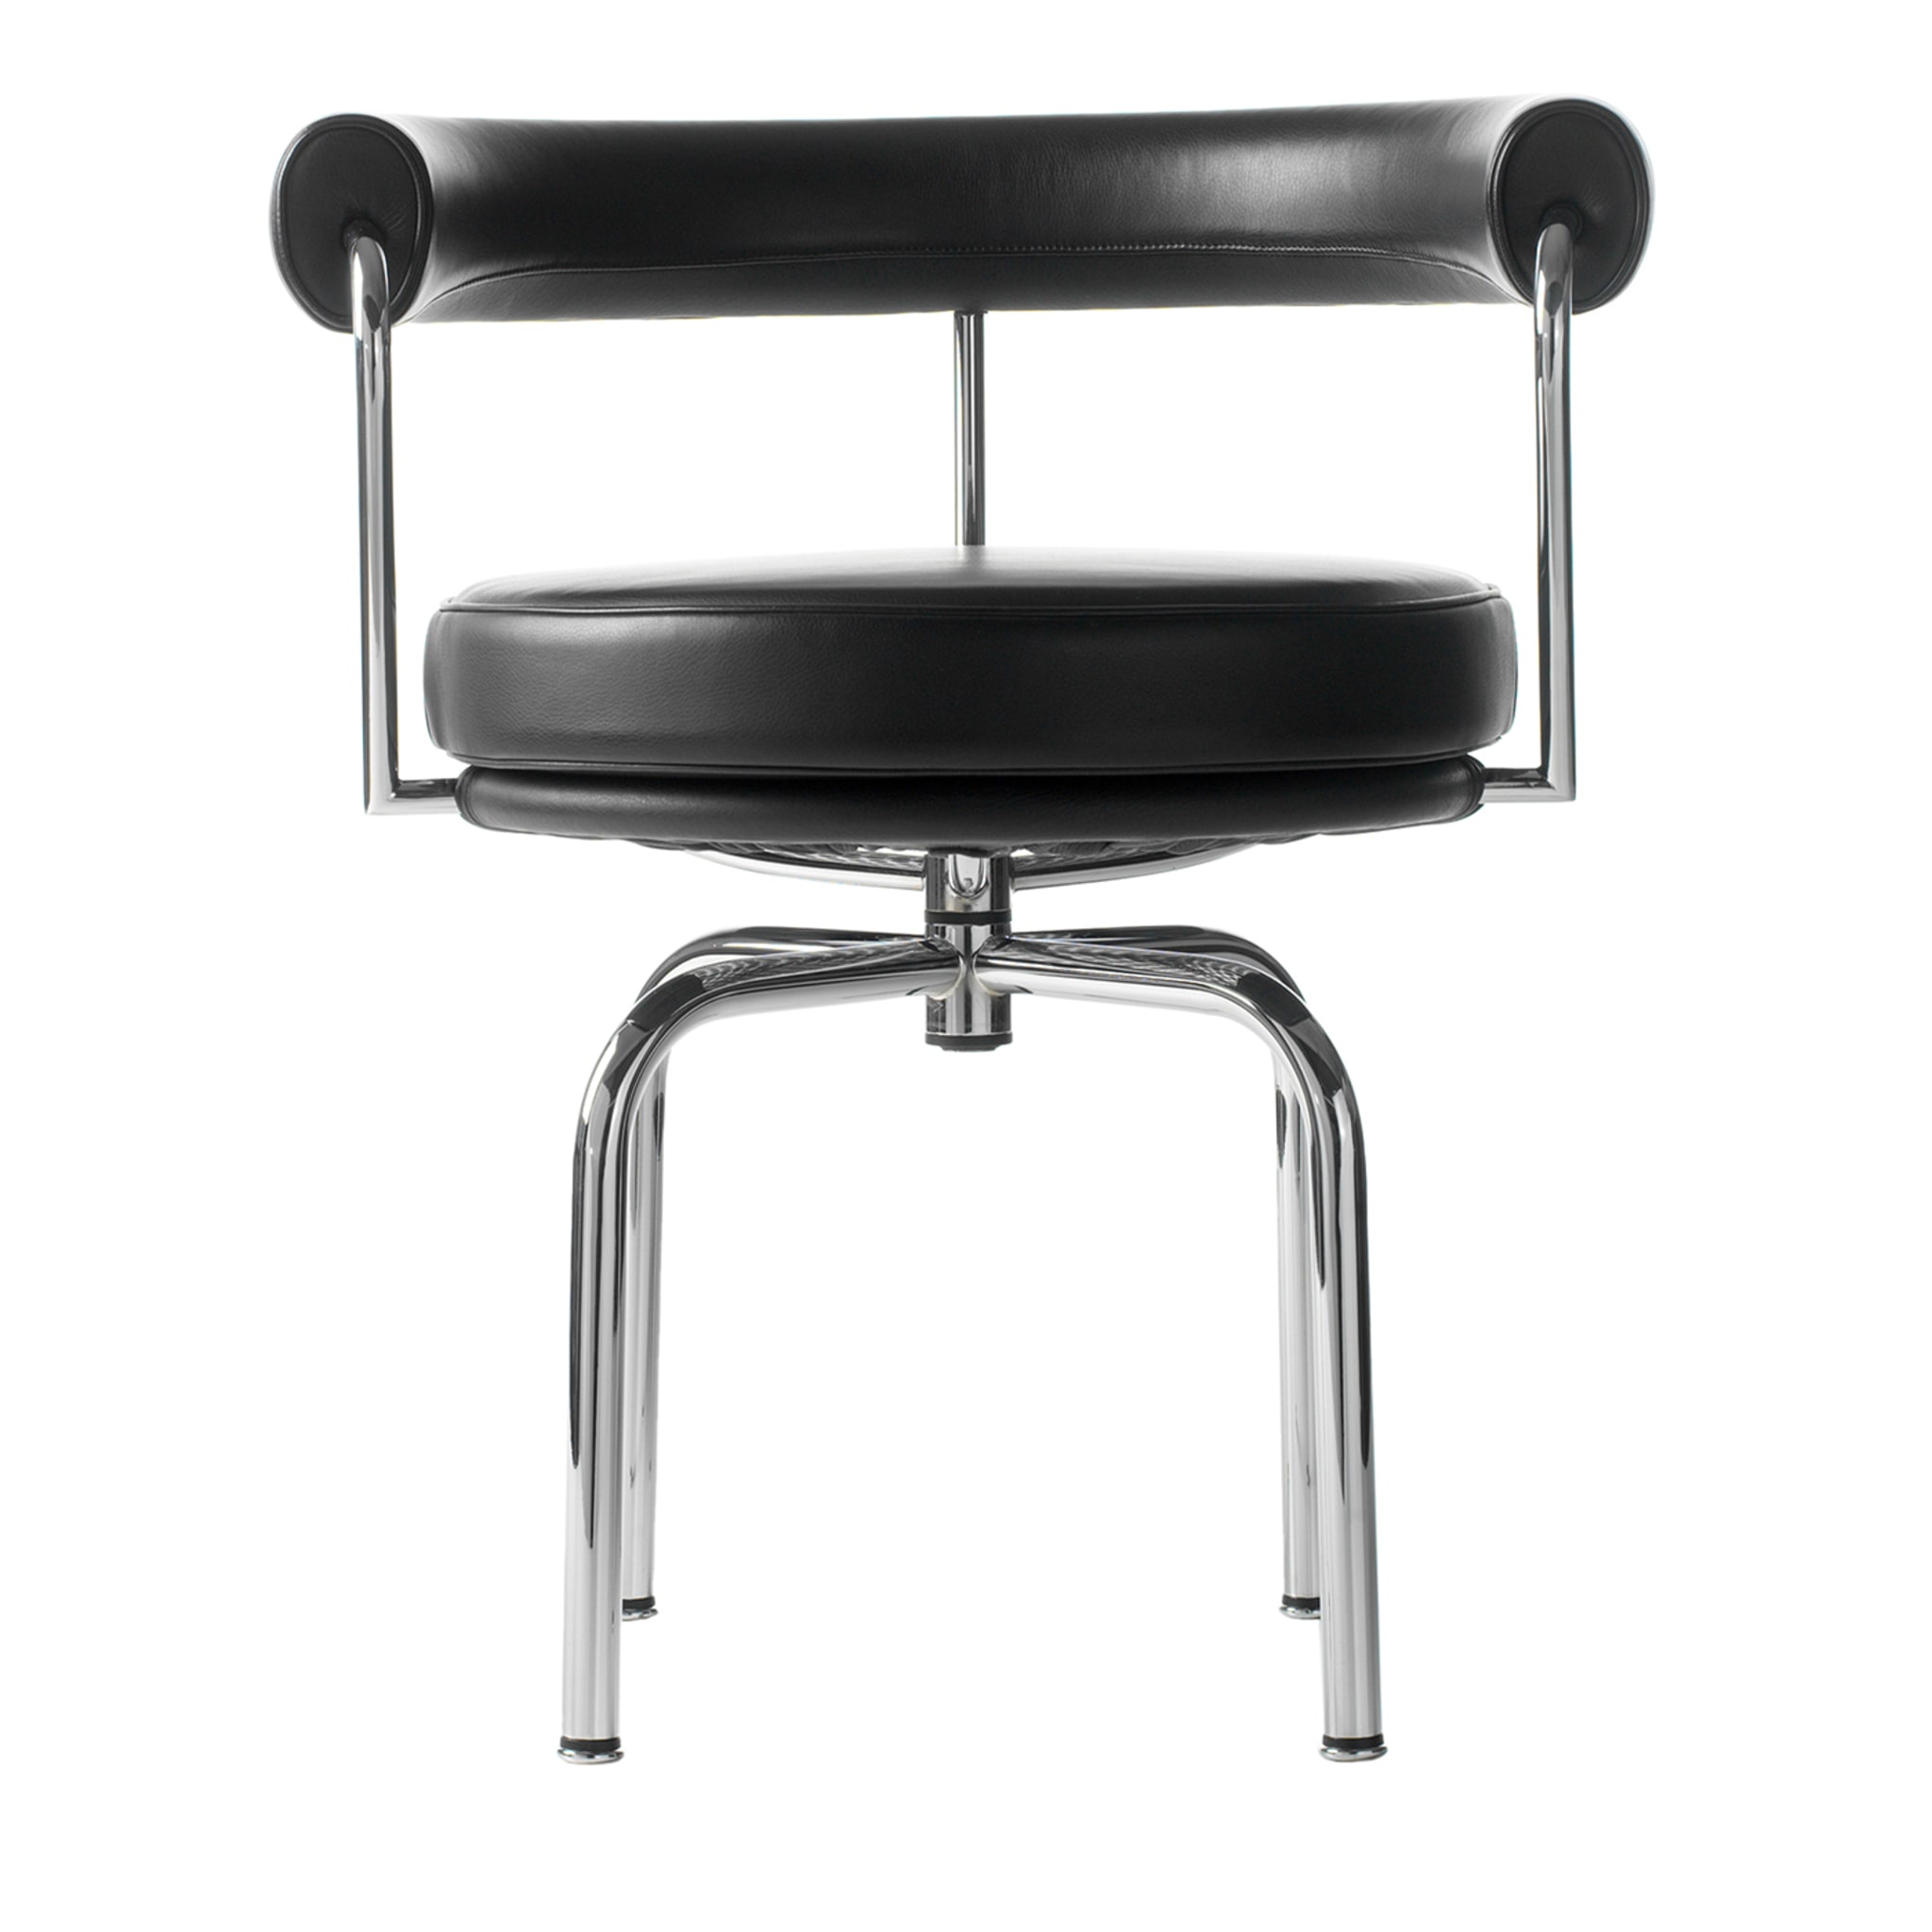 7 Fauteuil Tournant #2, by Charlotte Perriand/Lc Collection - Chromed Structure and Black Leather - Main view